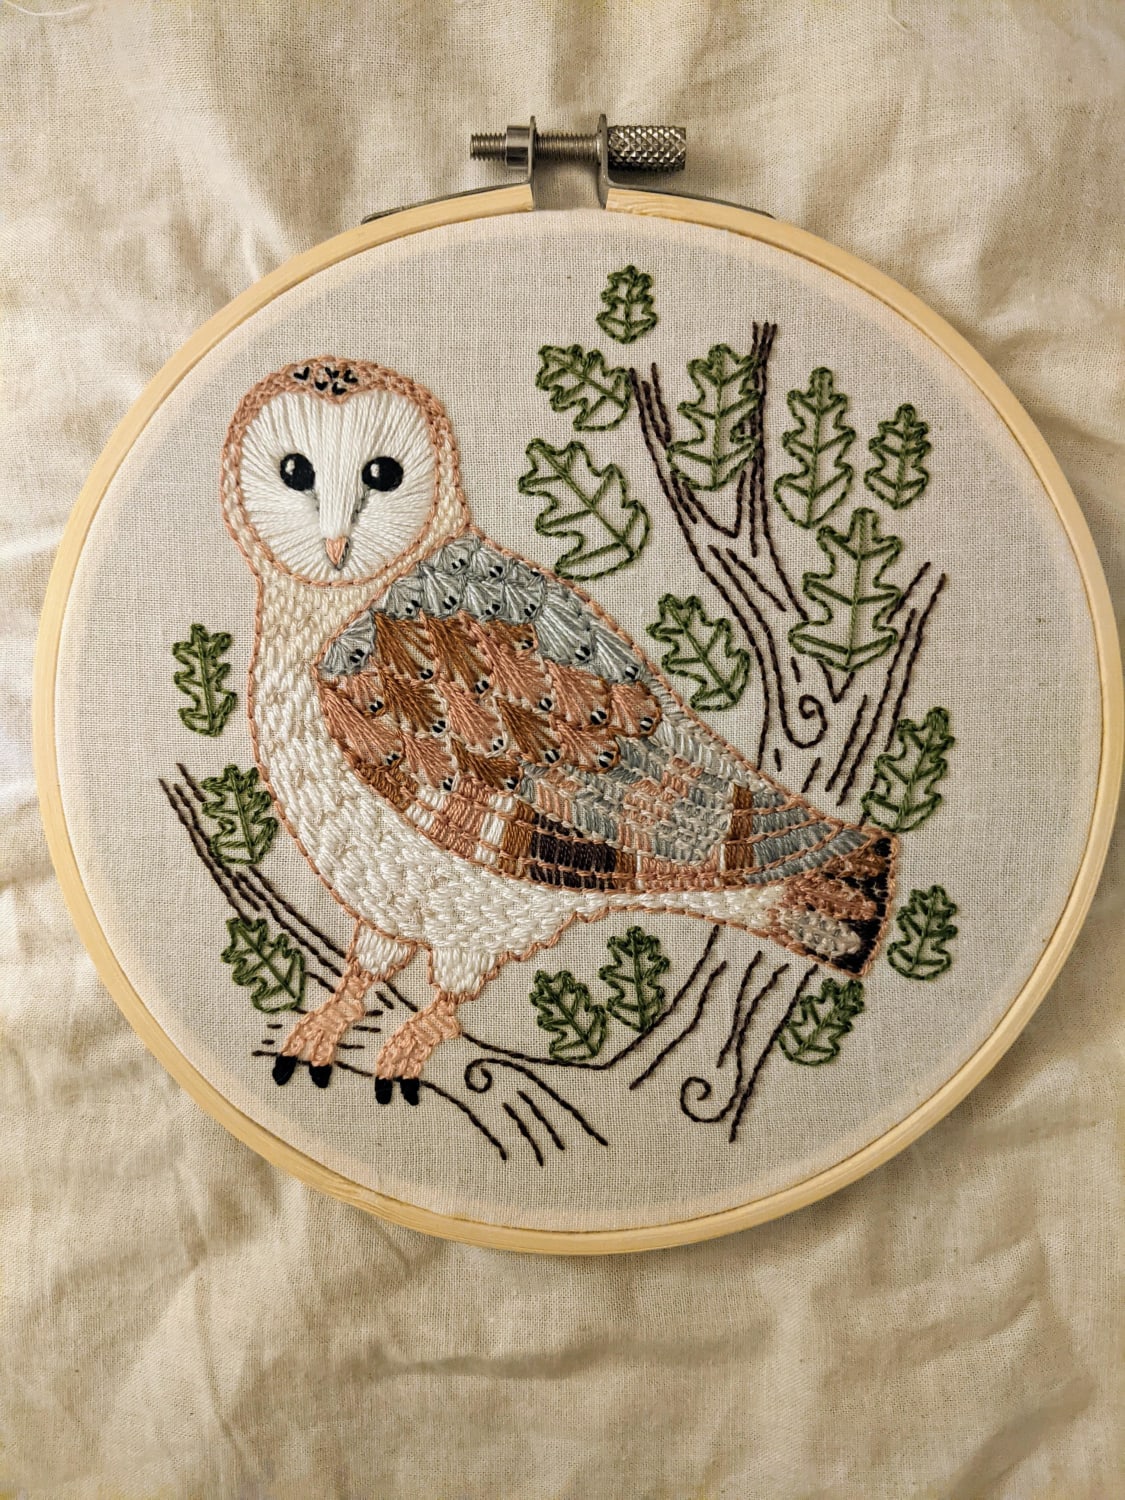 2nd project, a gift for my bf, my favorite wise owl (I hope all my friends and family are happy getting embroidery as gifts for the rest of their lives now)